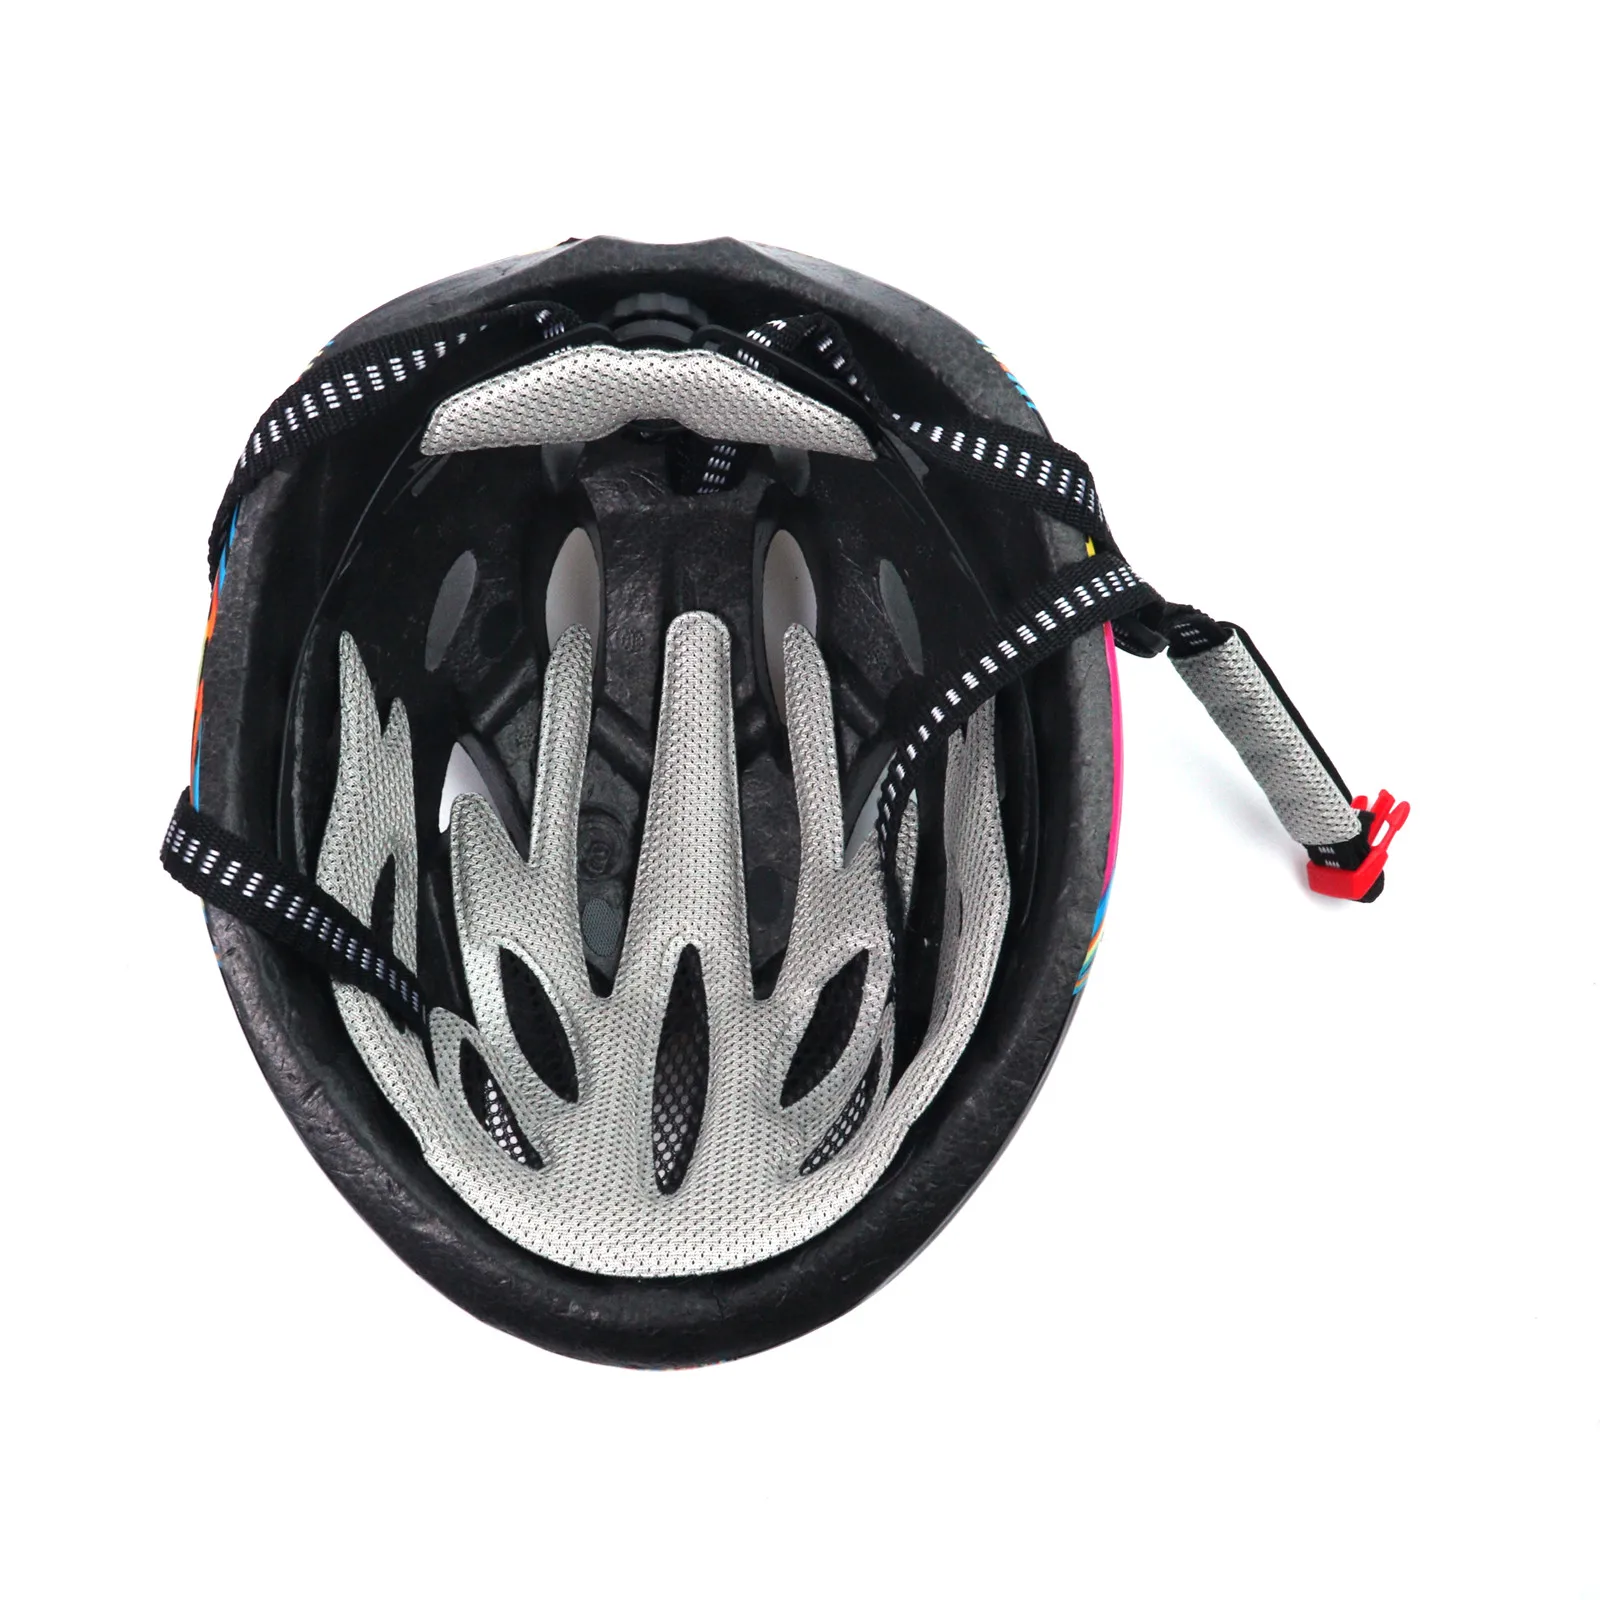 

Helmet Inner Padding Foam Pads Sponge Net Protective Lining Liner Cushion Mat Accessories for Cycling Bike Sport Bicycle Riding